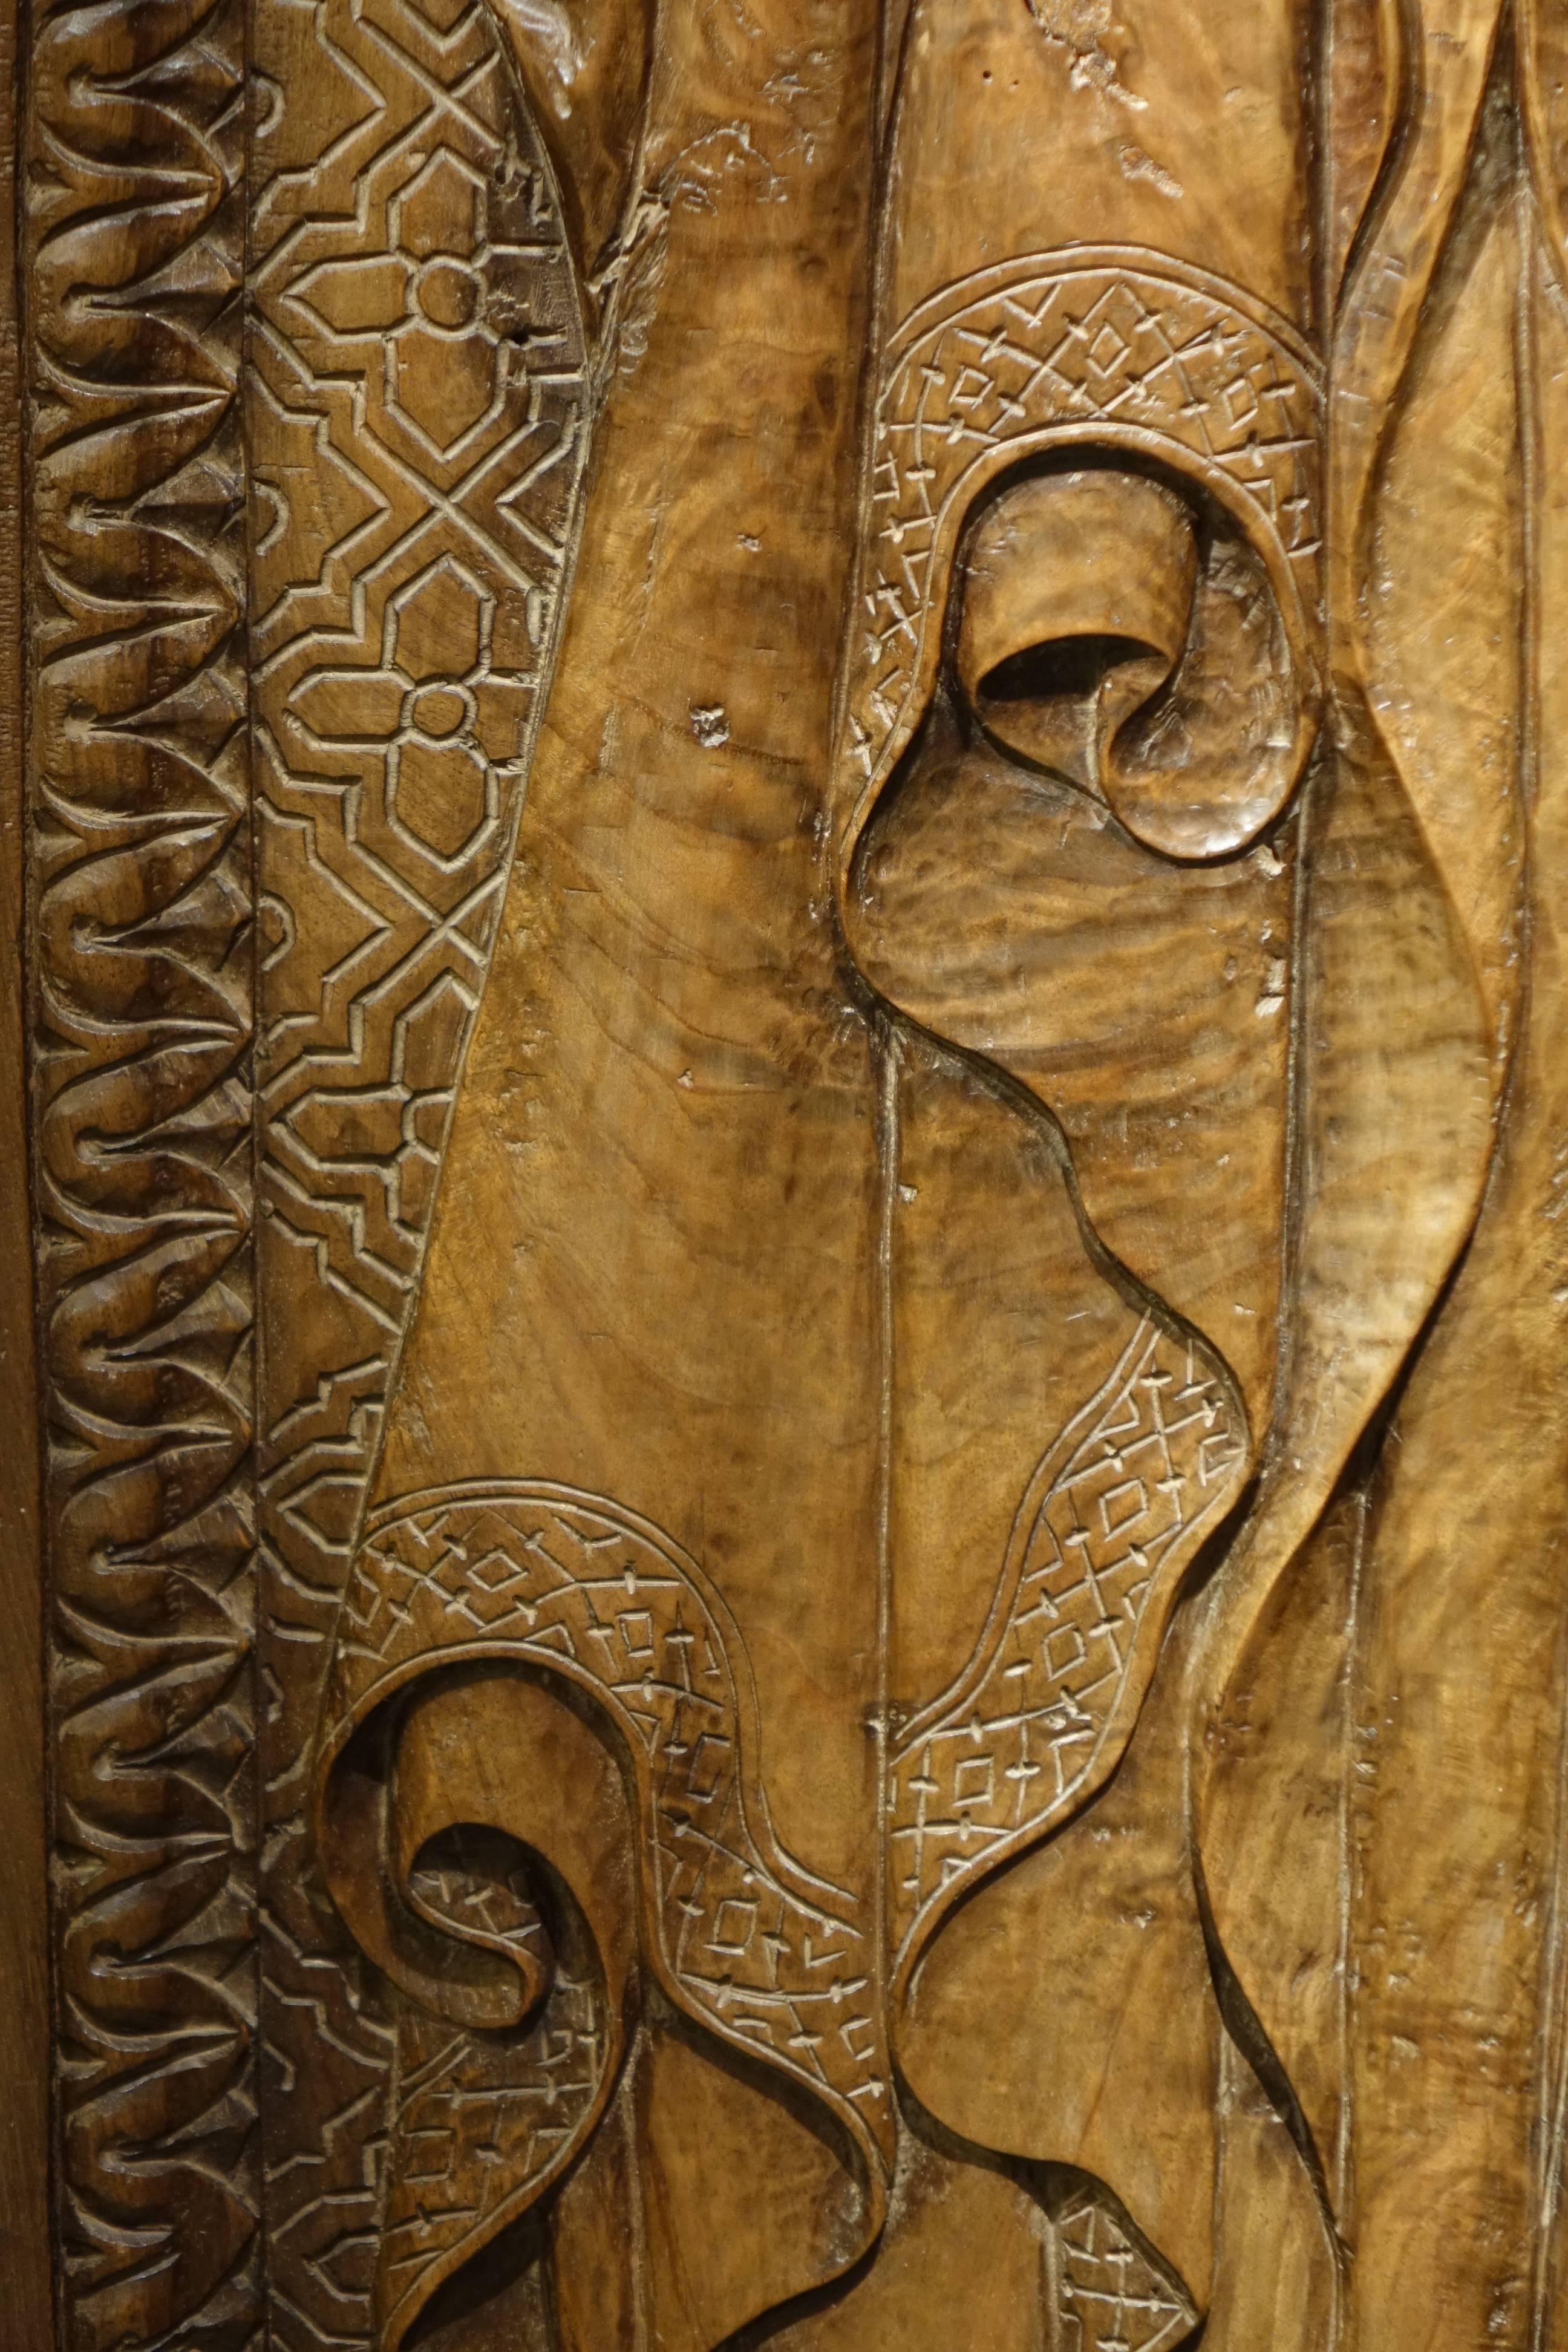  Bas Relief in Walnut wood  representing Saint James, Venice Circa 1550 
Italy 16th Century
Sculpted in one panel of wood. 